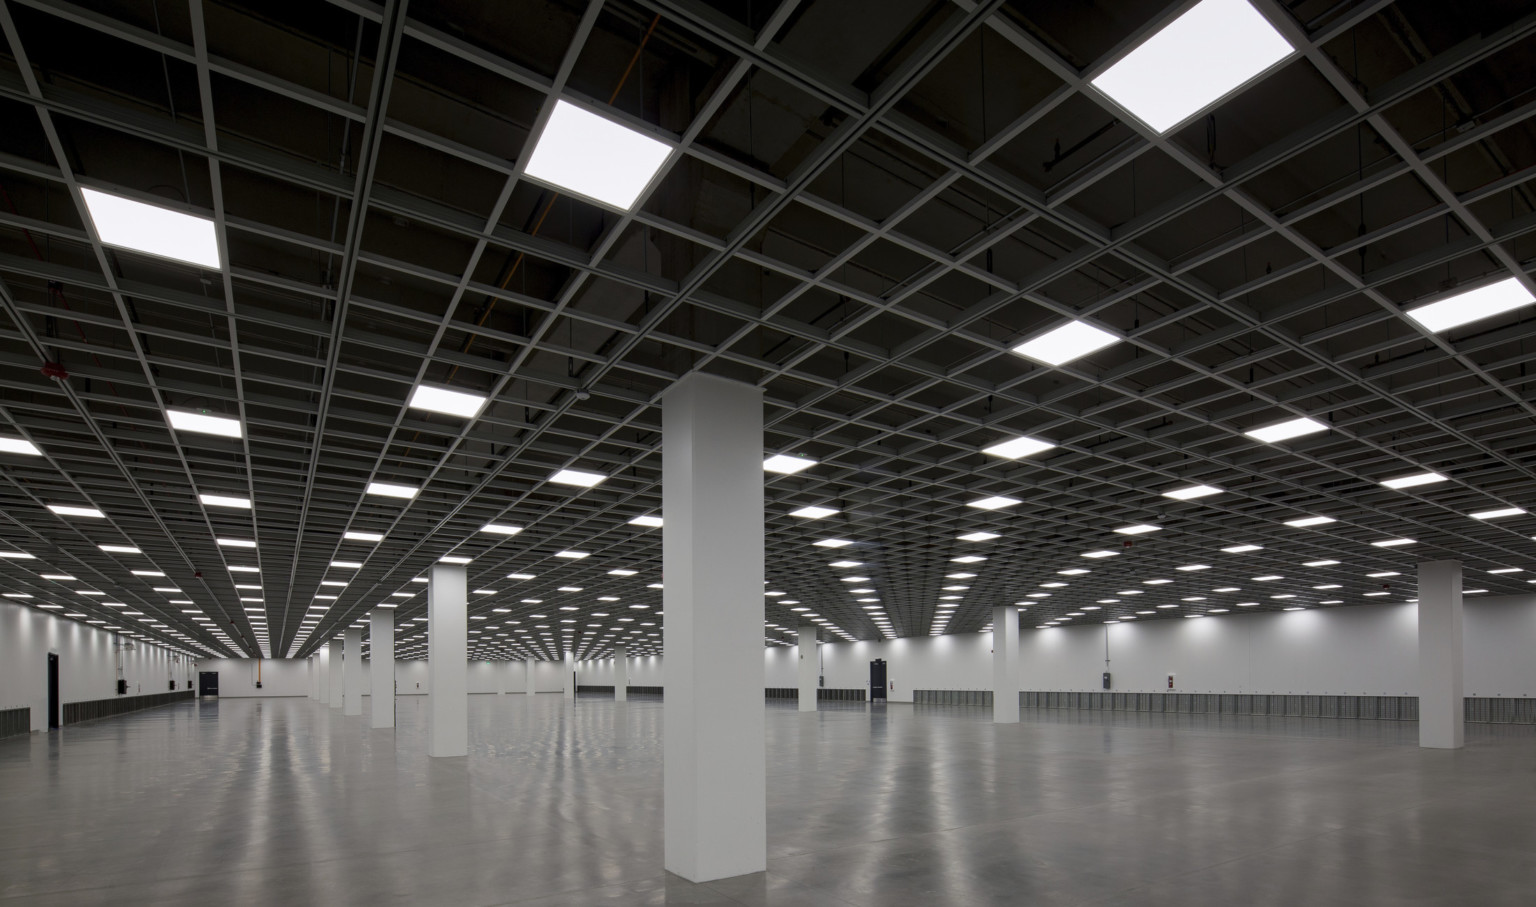 wide open room with reflect cement floors, white square columns white walls, open black ceiling with repeating light squares